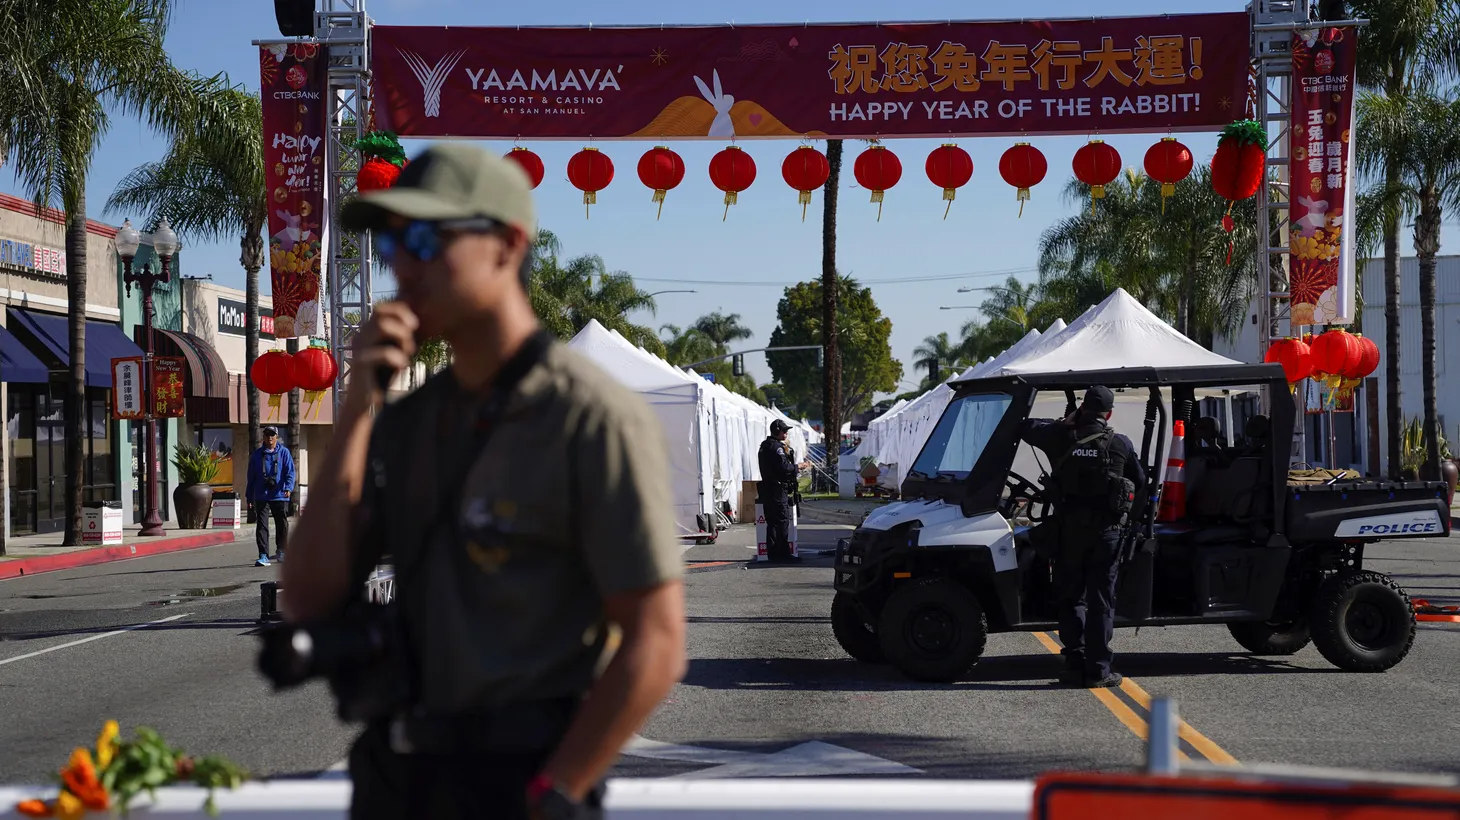 Police investigate the scene of a shooting that took place during a Chinese Lunar New Year celebration, in Monterey Park, California, U.S. January 22, 2023.